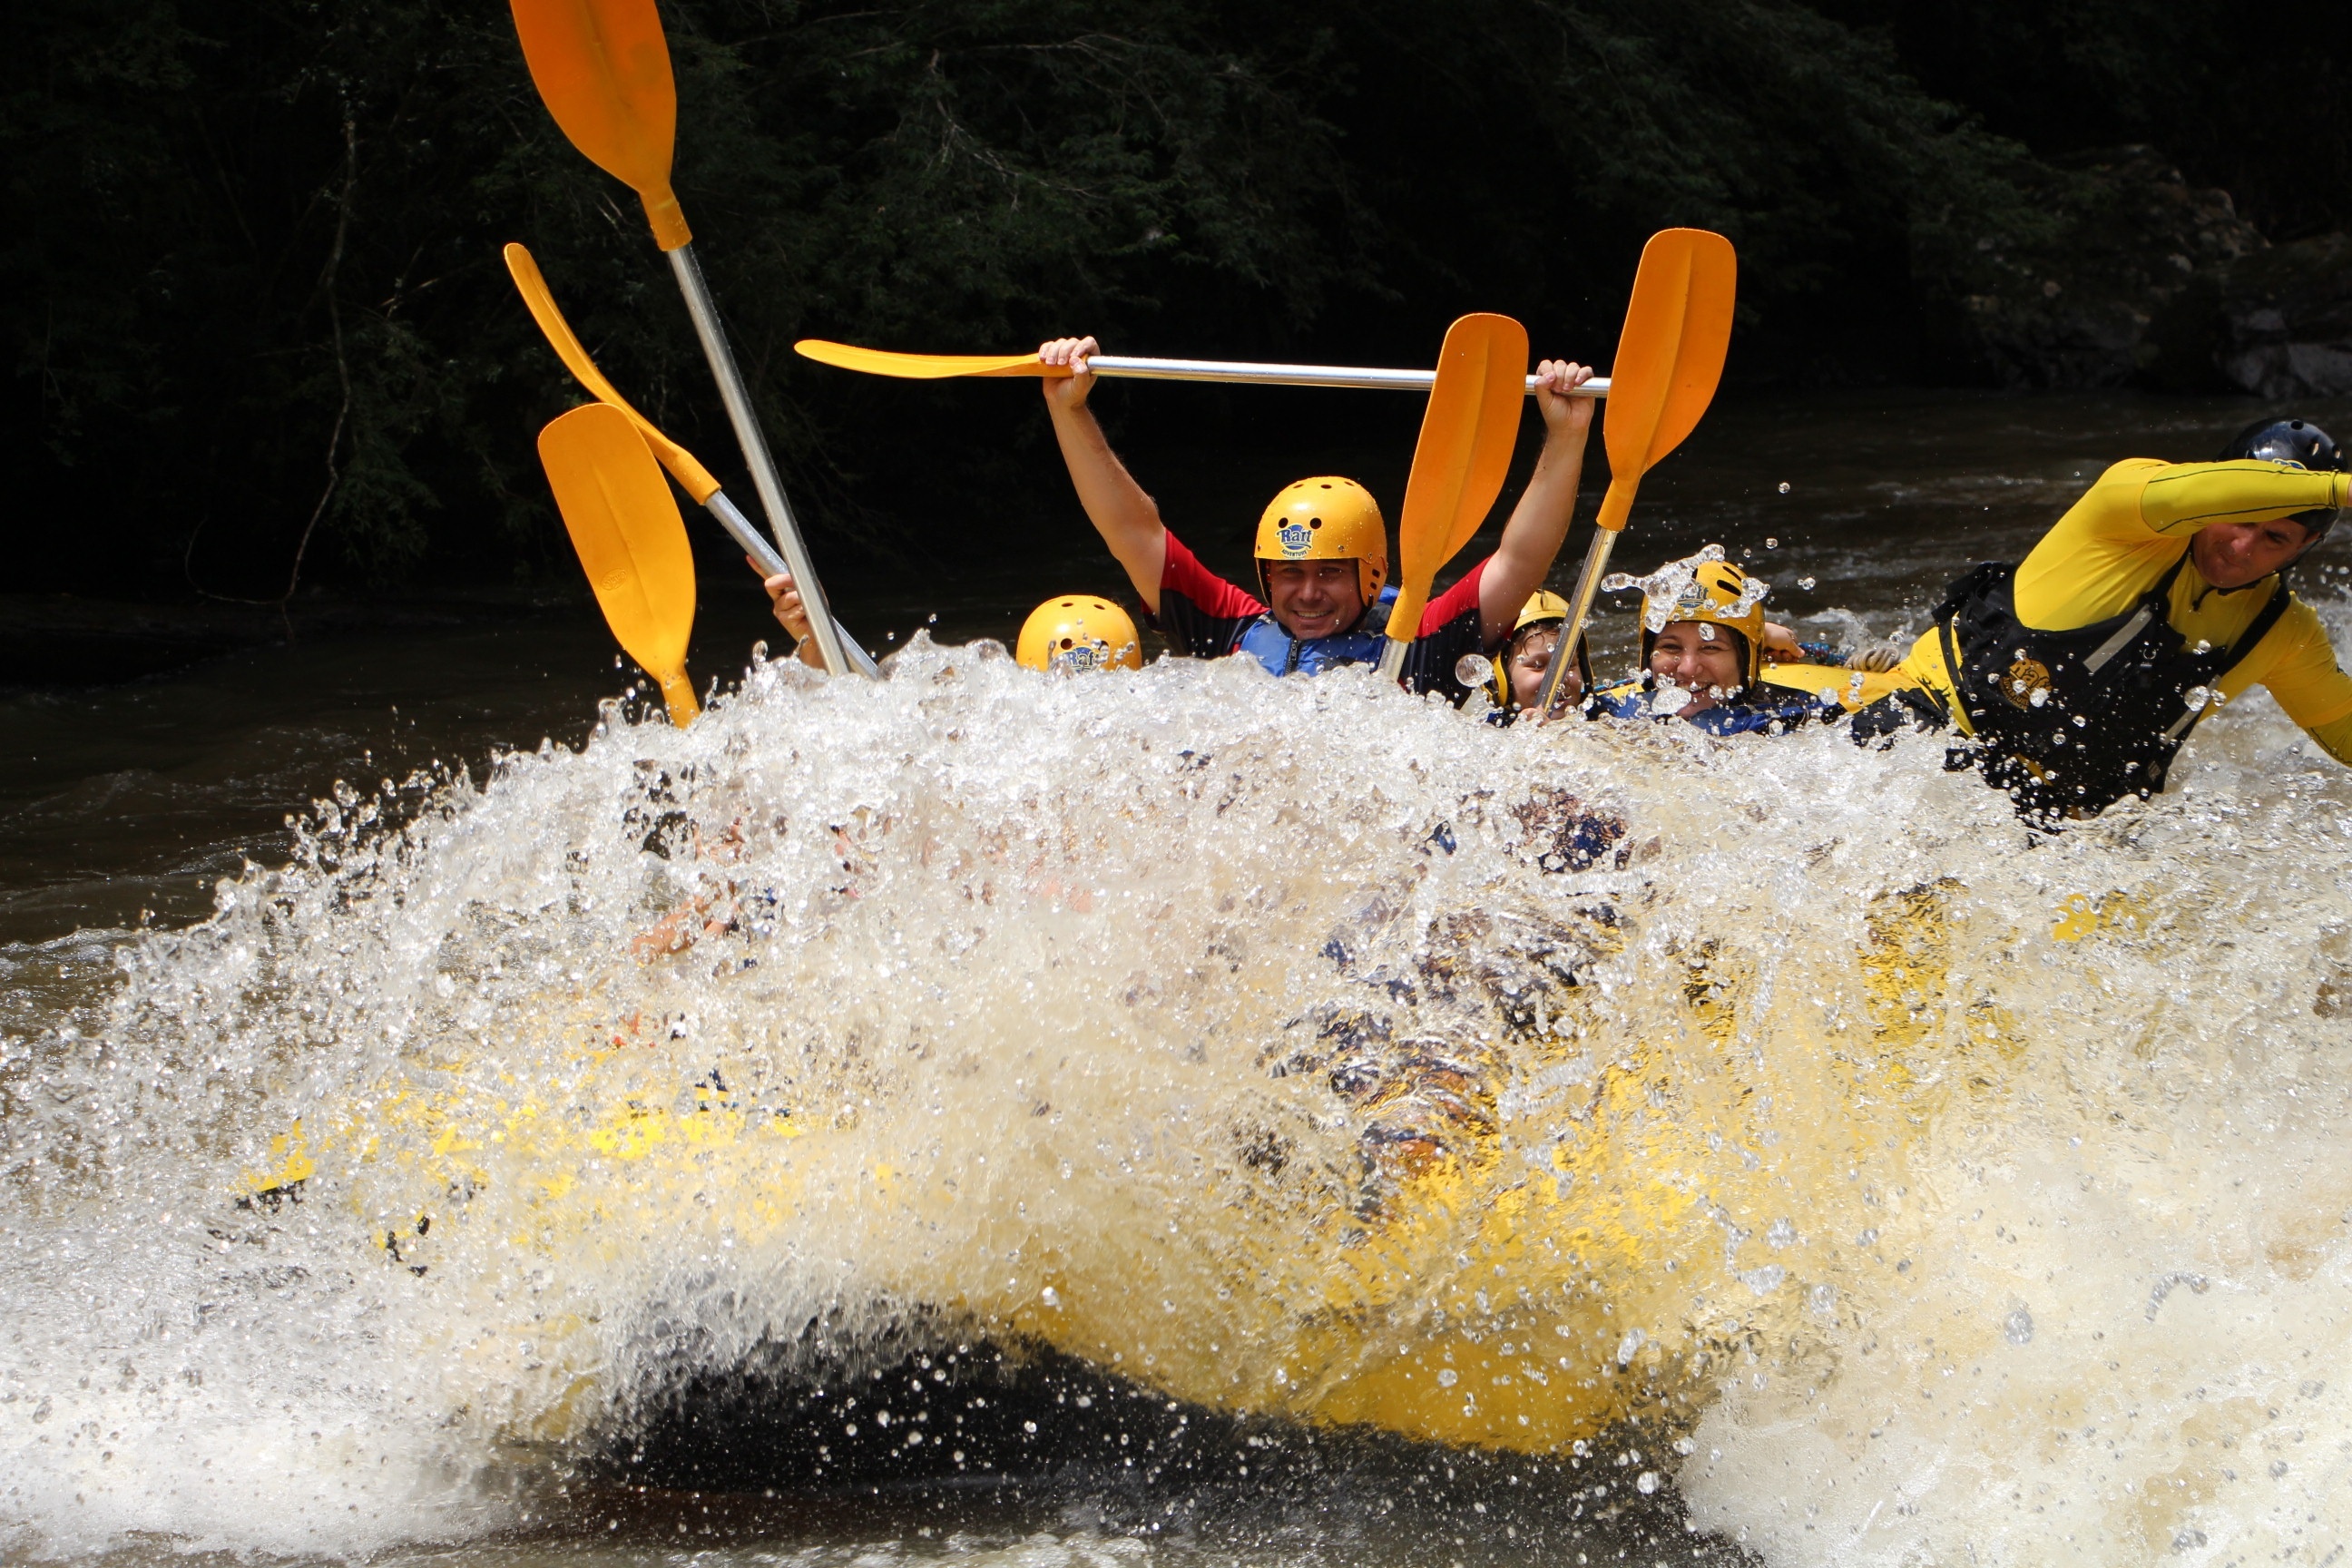 White water thrill, Rafting HD wallpapers, Action-packed adventure, Outdoor excitement, 2600x1730 HD Desktop